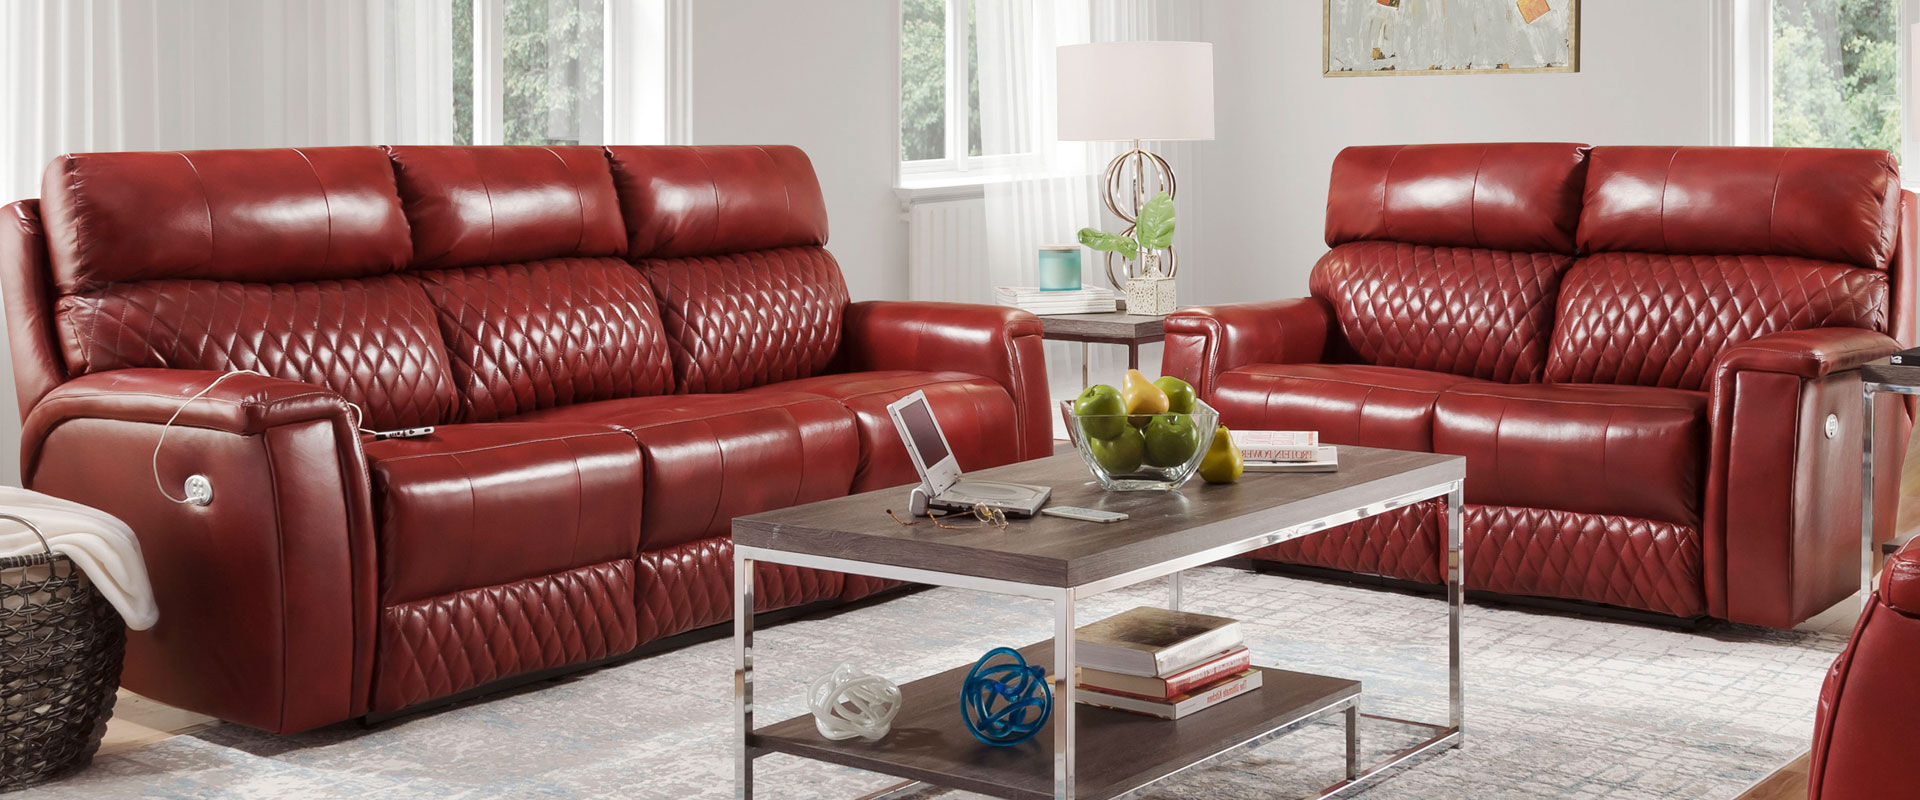 Lane Furniture Sofas And Sectionals